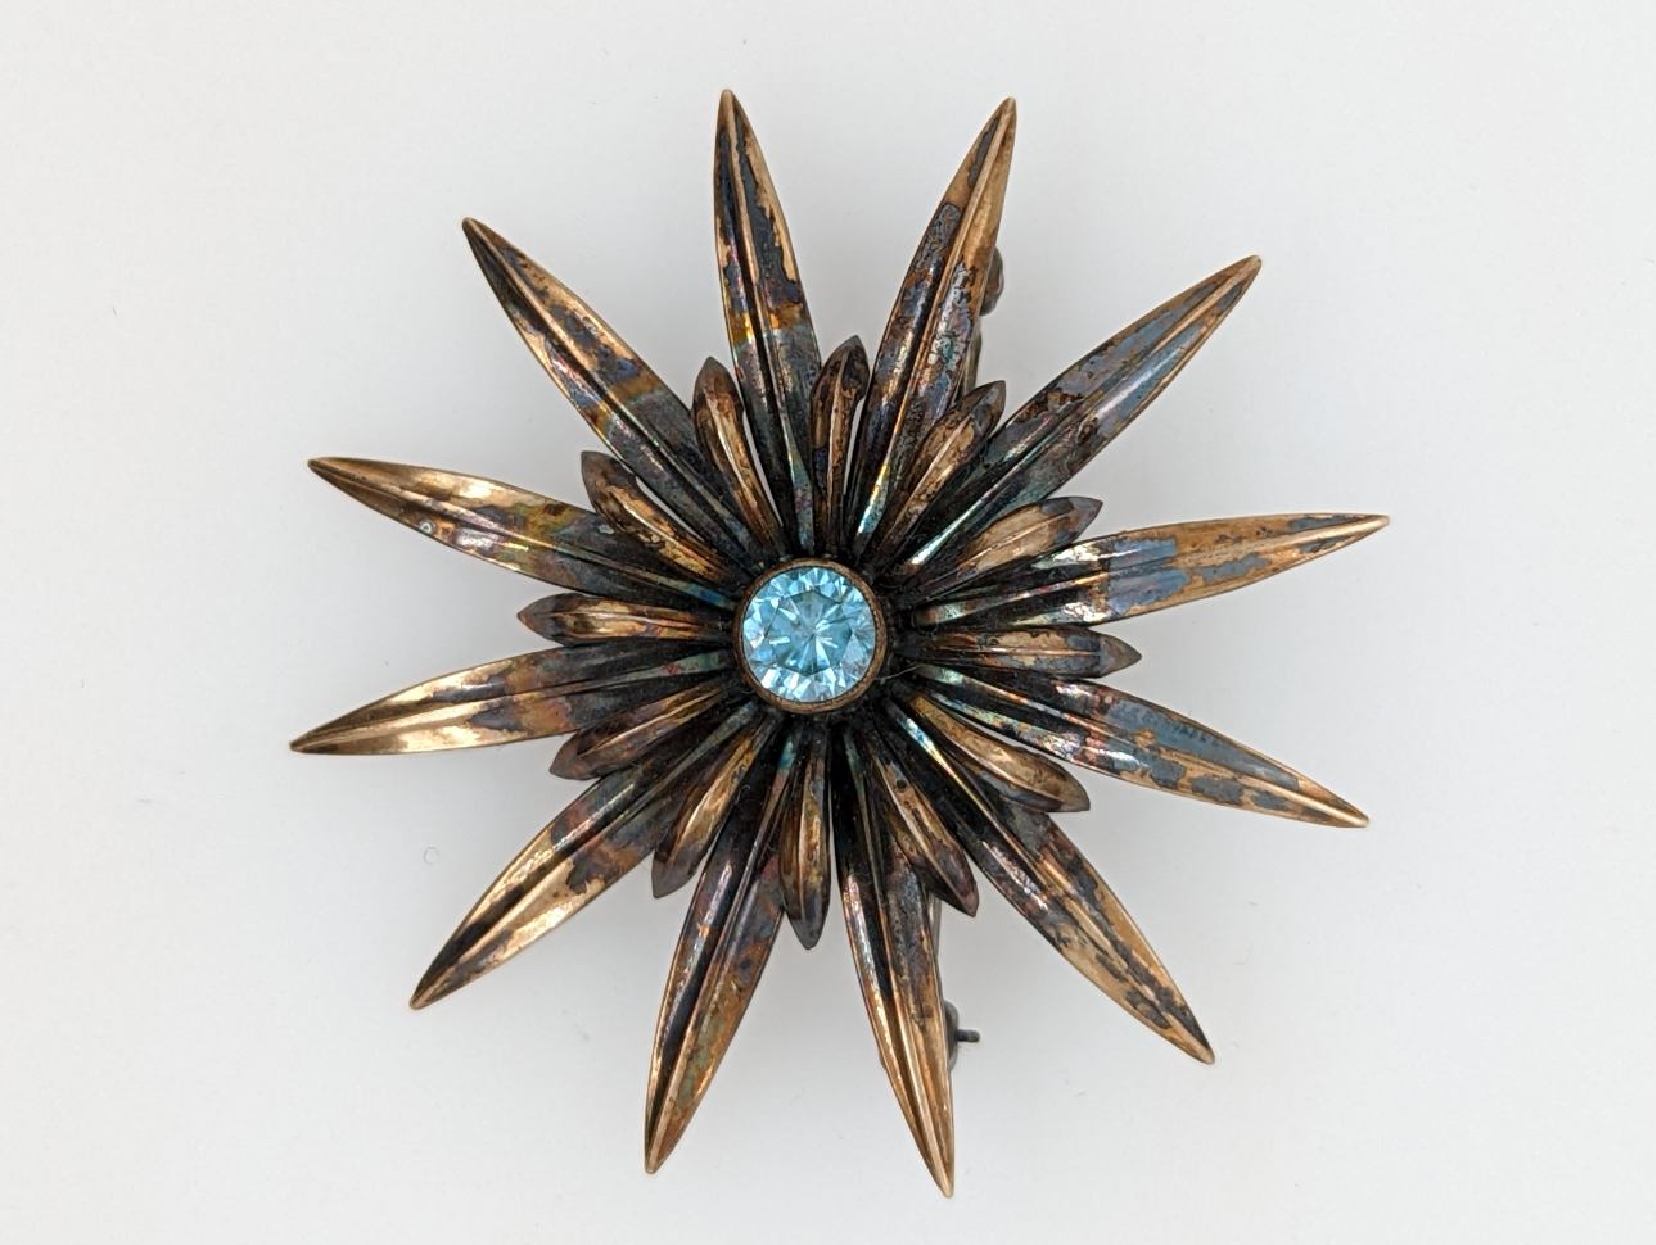 Vintage Symmetallic Sterling Floral Pin with 14K Gold Plating and Blue Topaz Colored Paste Stone